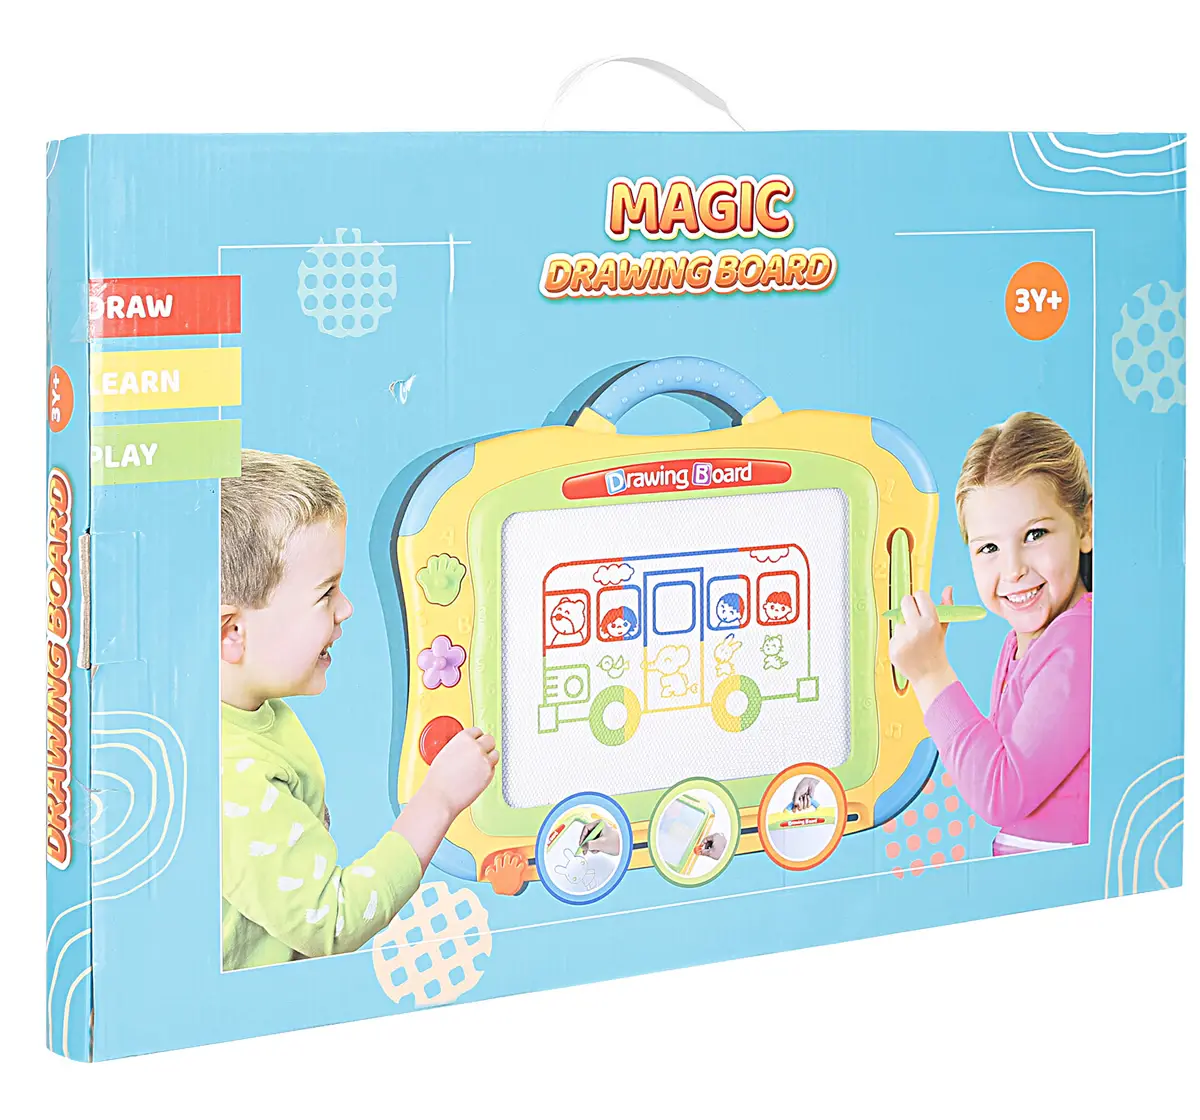 Karma Drawing Doddle Board Large for kids 3Y+, Multicolour